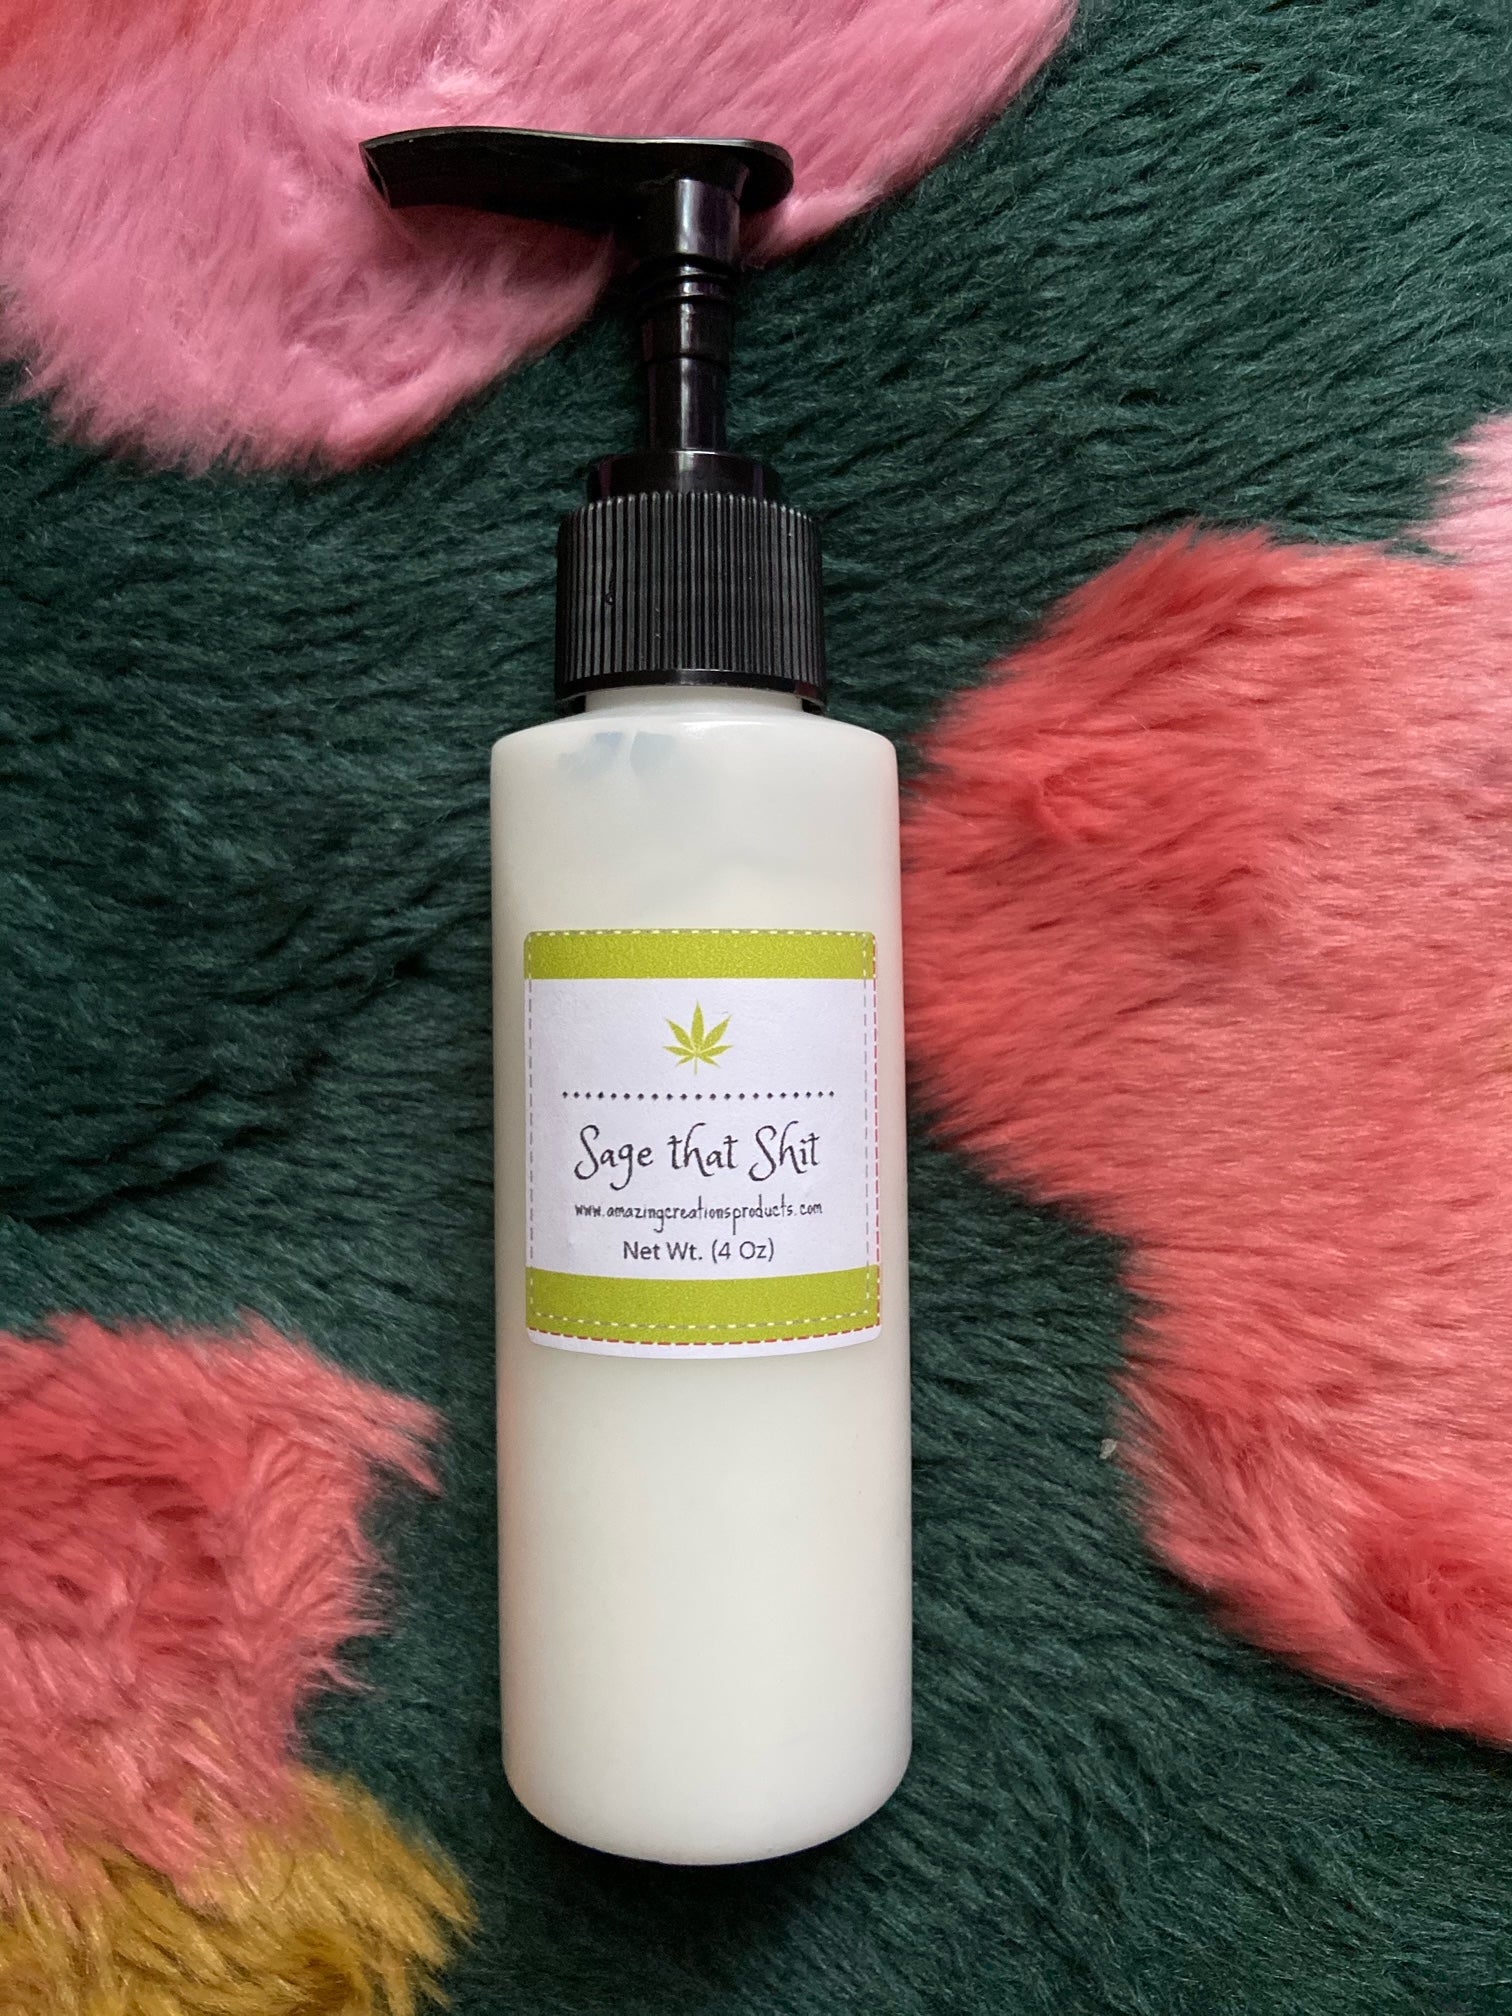  Sage that Shit Lotion -  available at Amazing Creations Products . Grab yours for $5.00 today!